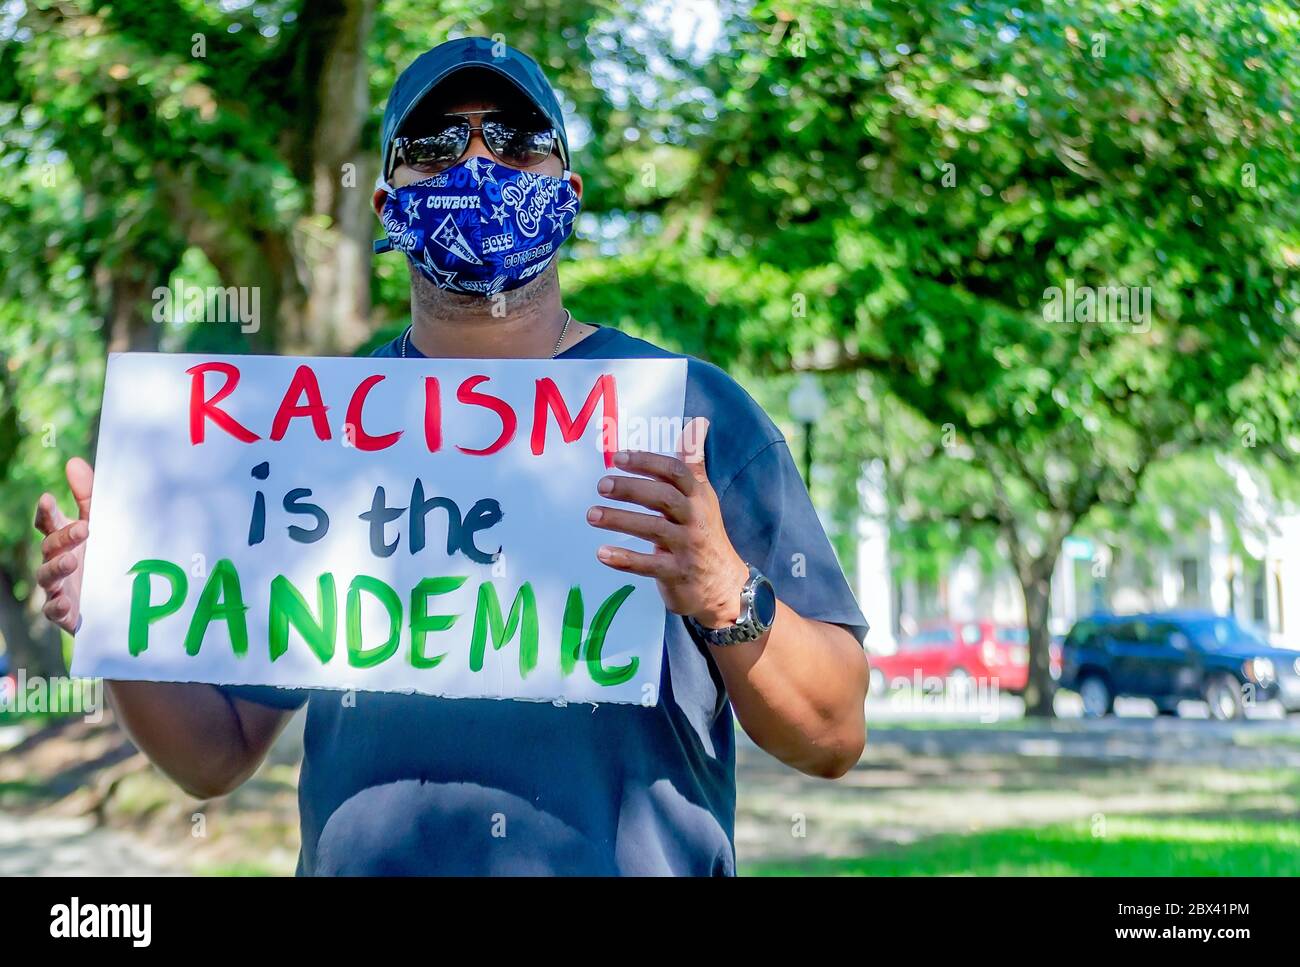 A protestor waves a sign denouncing racism while at a protest against police brutality, June 4, 2020, at Memorial Park in Mobile, Alabama. Stock Photo